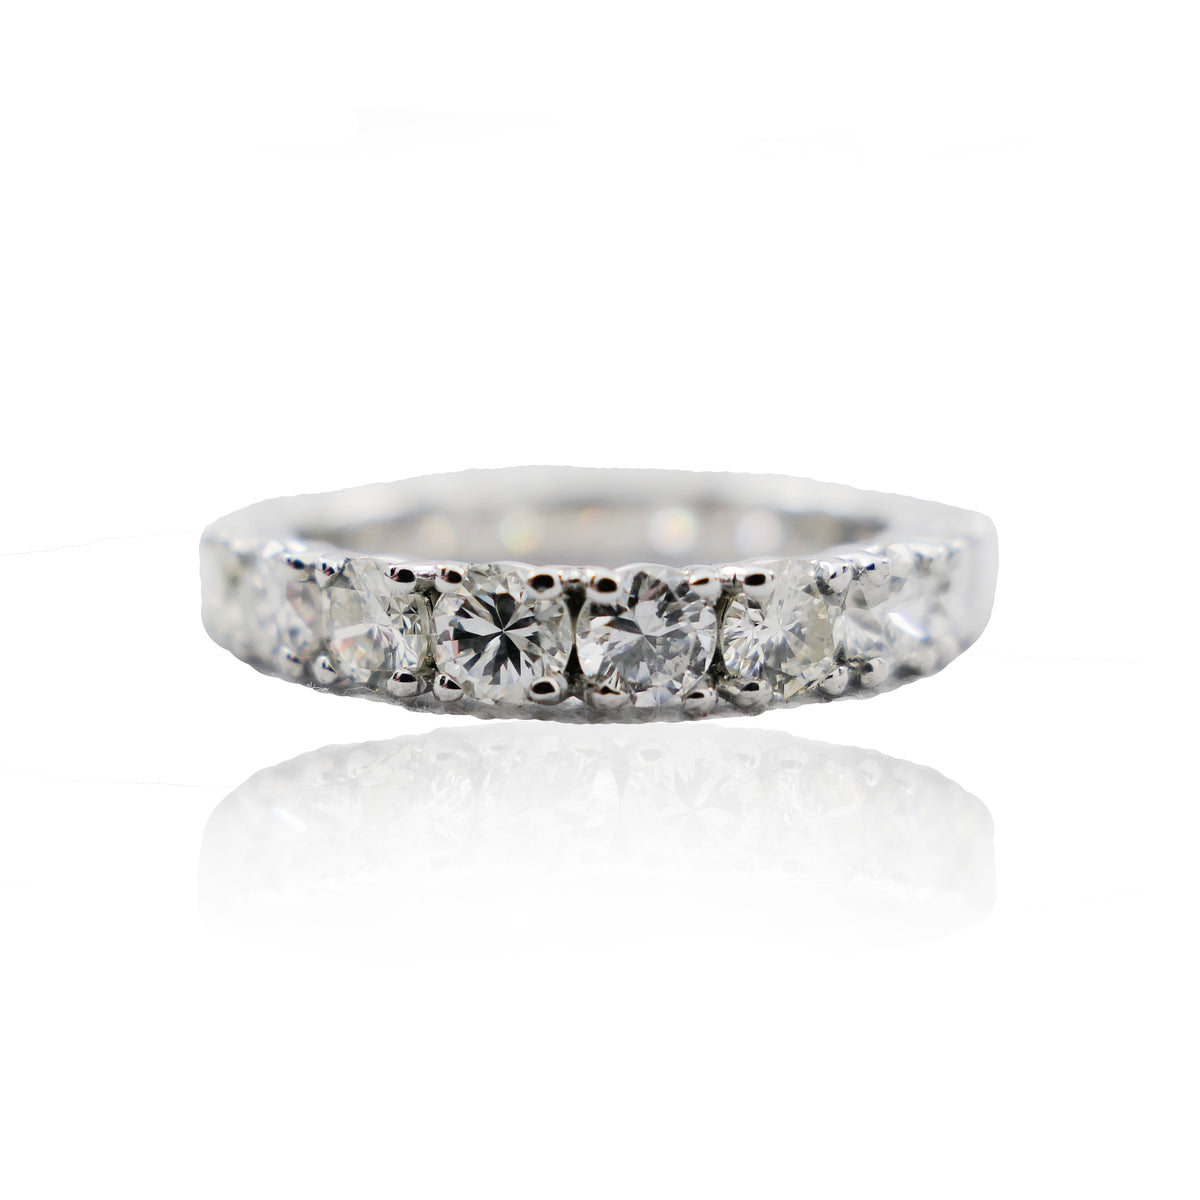 White Gold Eternity Ring with Heirloom Diamonds